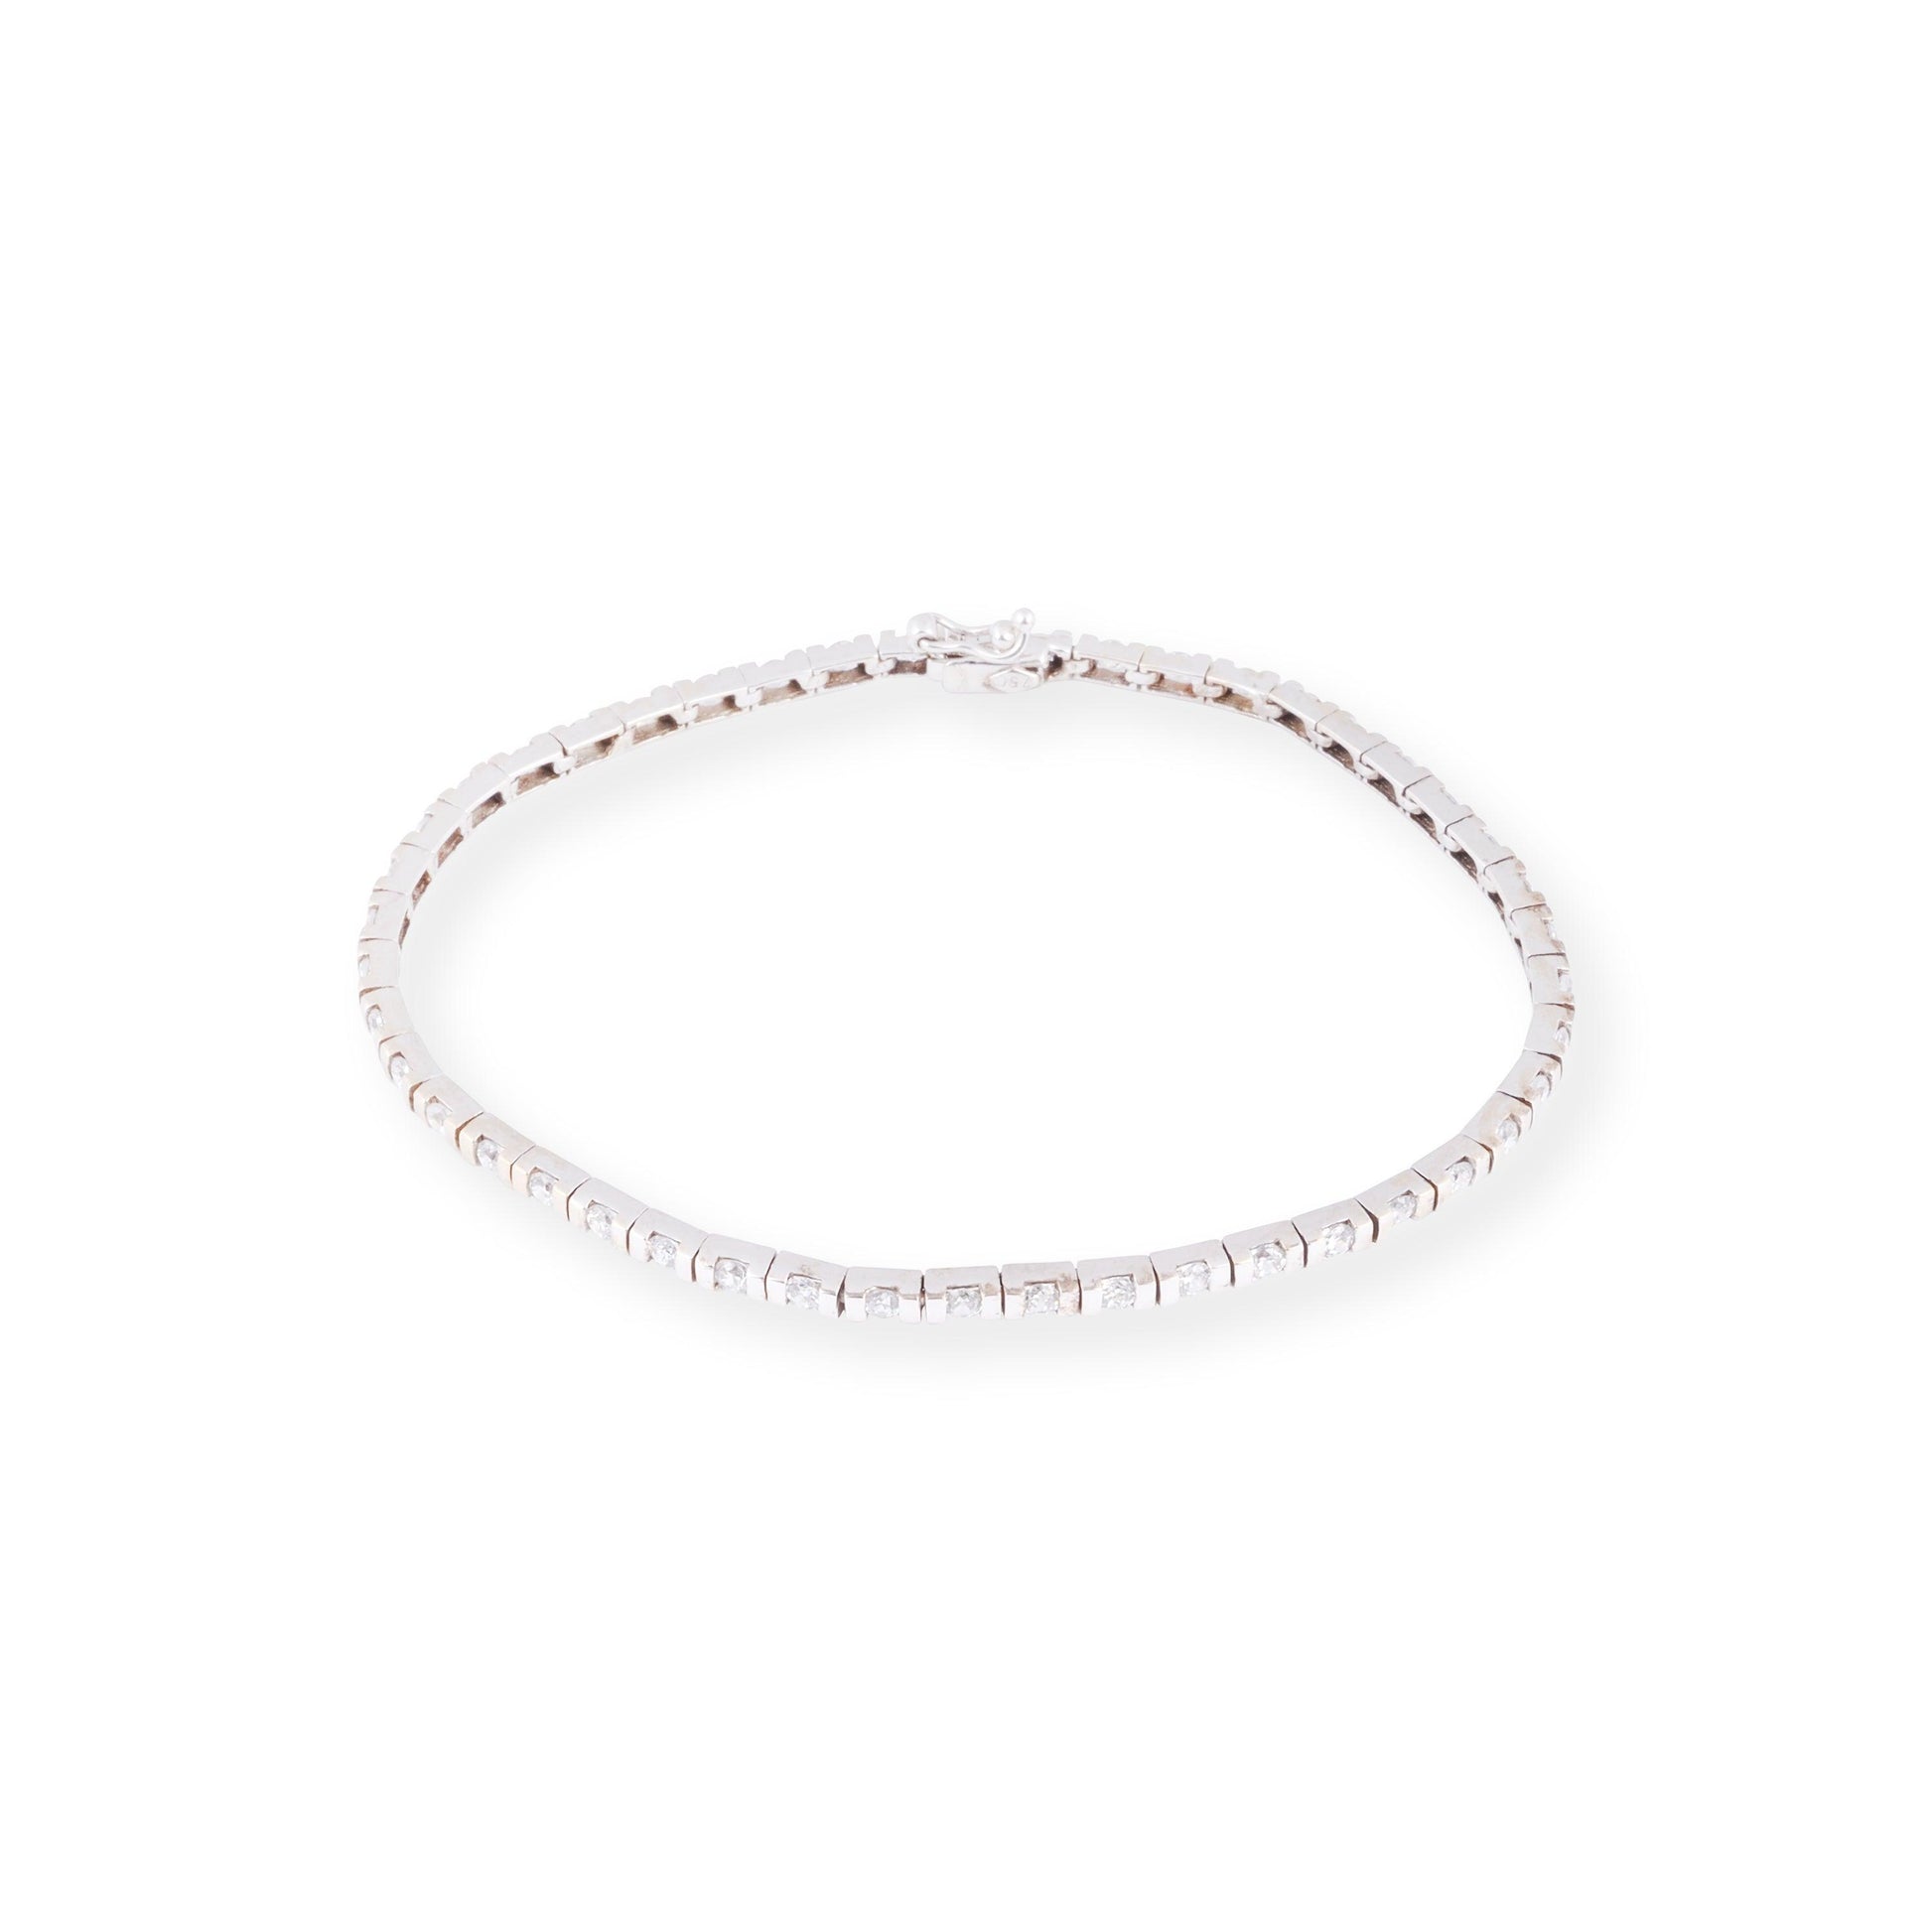 18ct White Gold Tennis Bracelet with Cubic Zirconia & Box Clasp LBR-8524 - Minar Jewellers